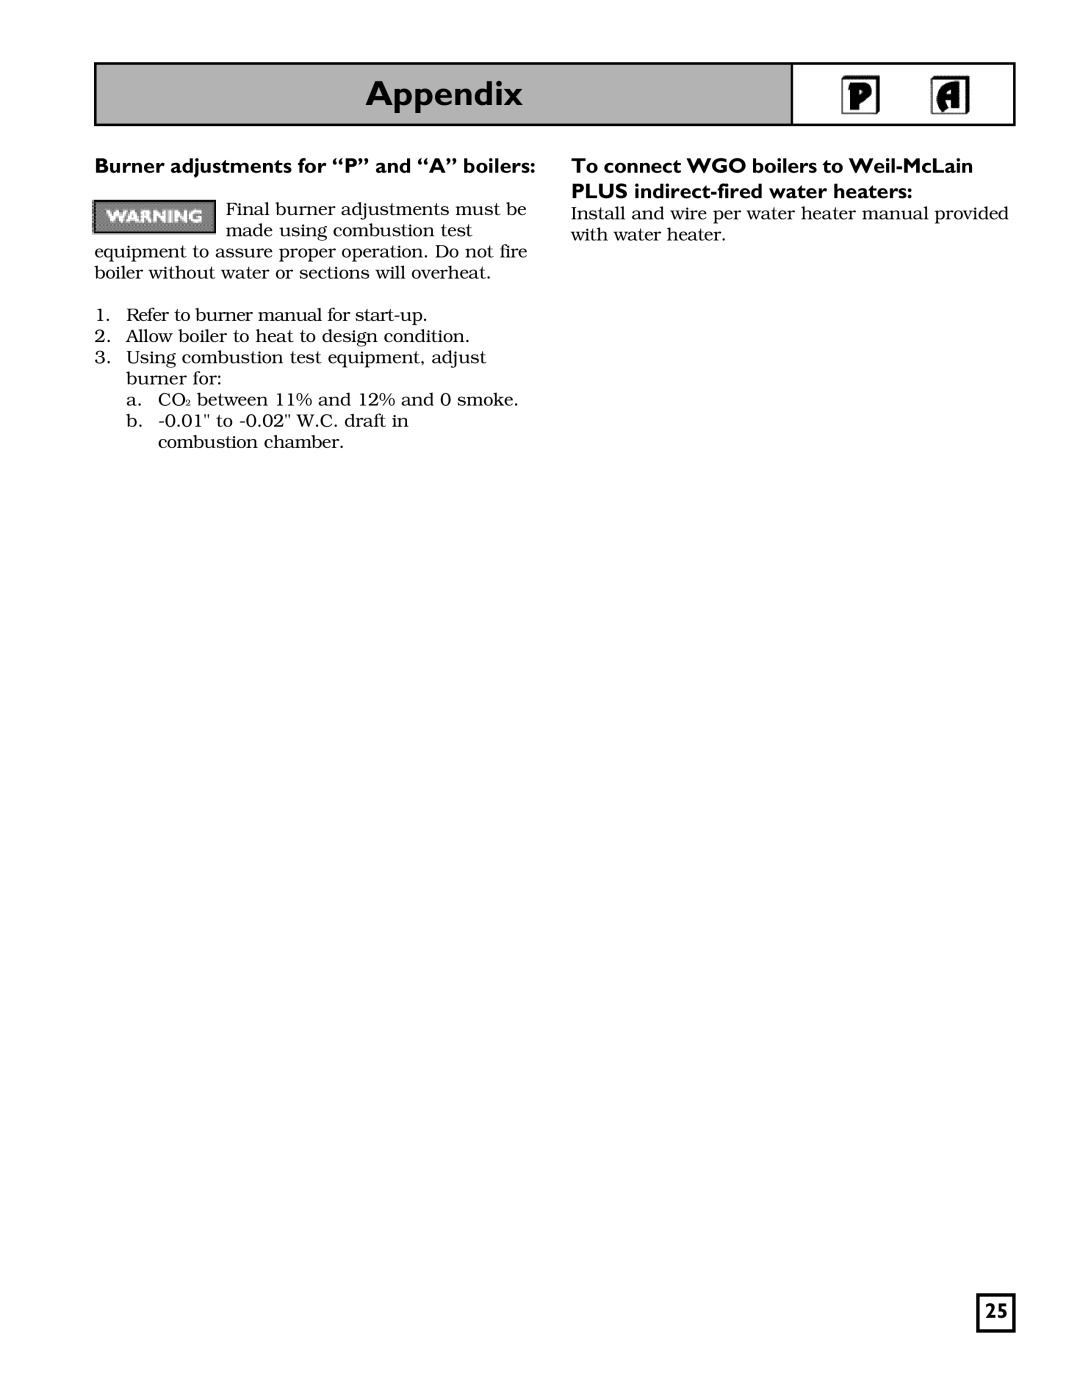 Weil-McLain 550-141-826/1201 manual Appendix, Burner adjustments for “P” and “A” boilers 